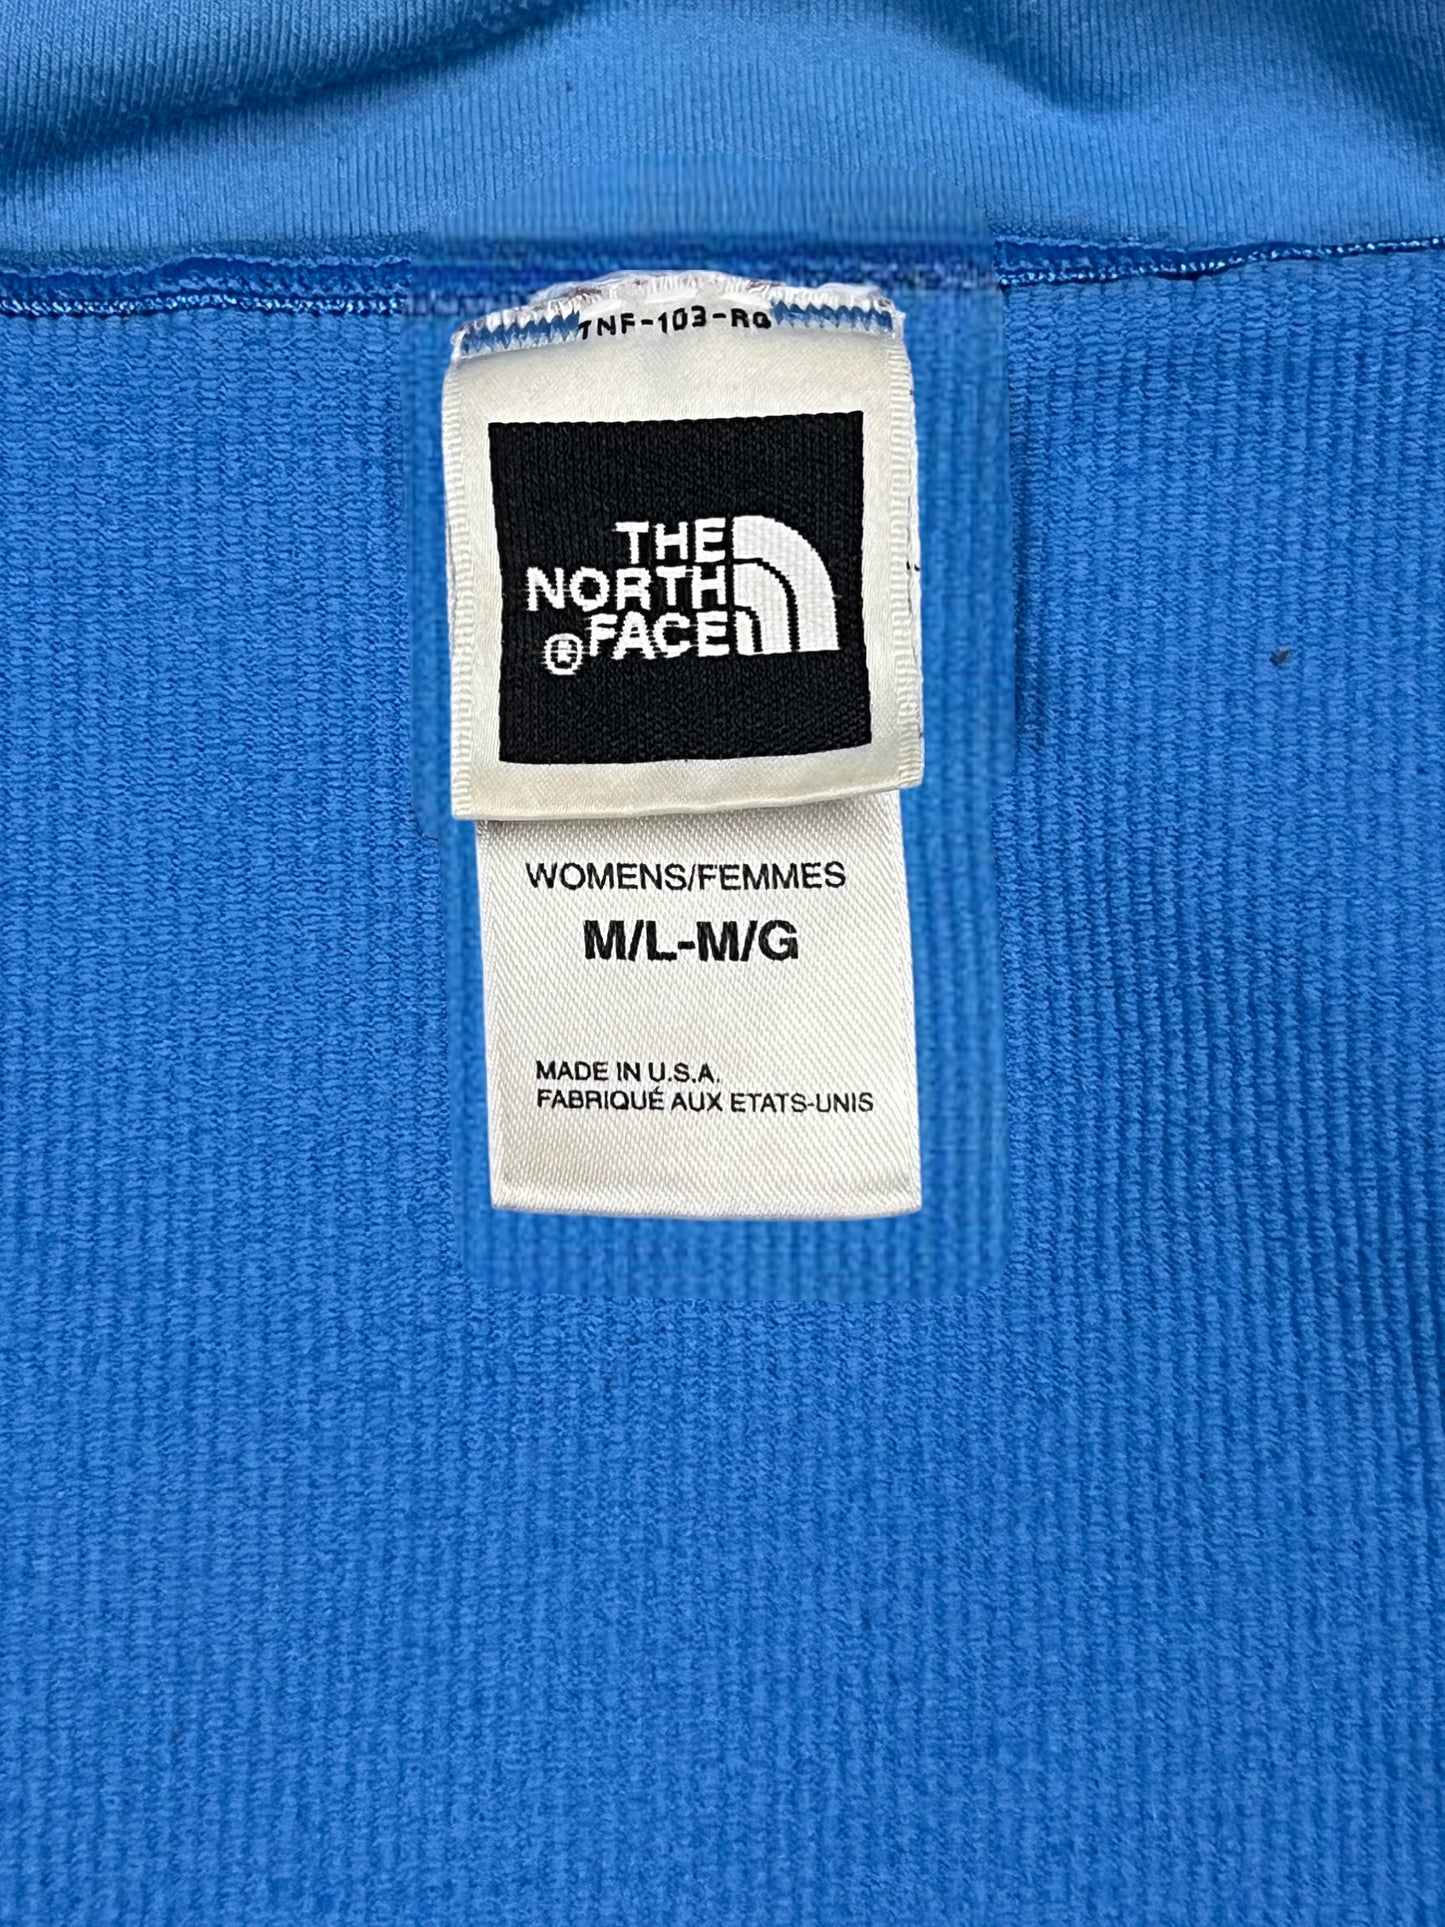 The North Face Tank Top